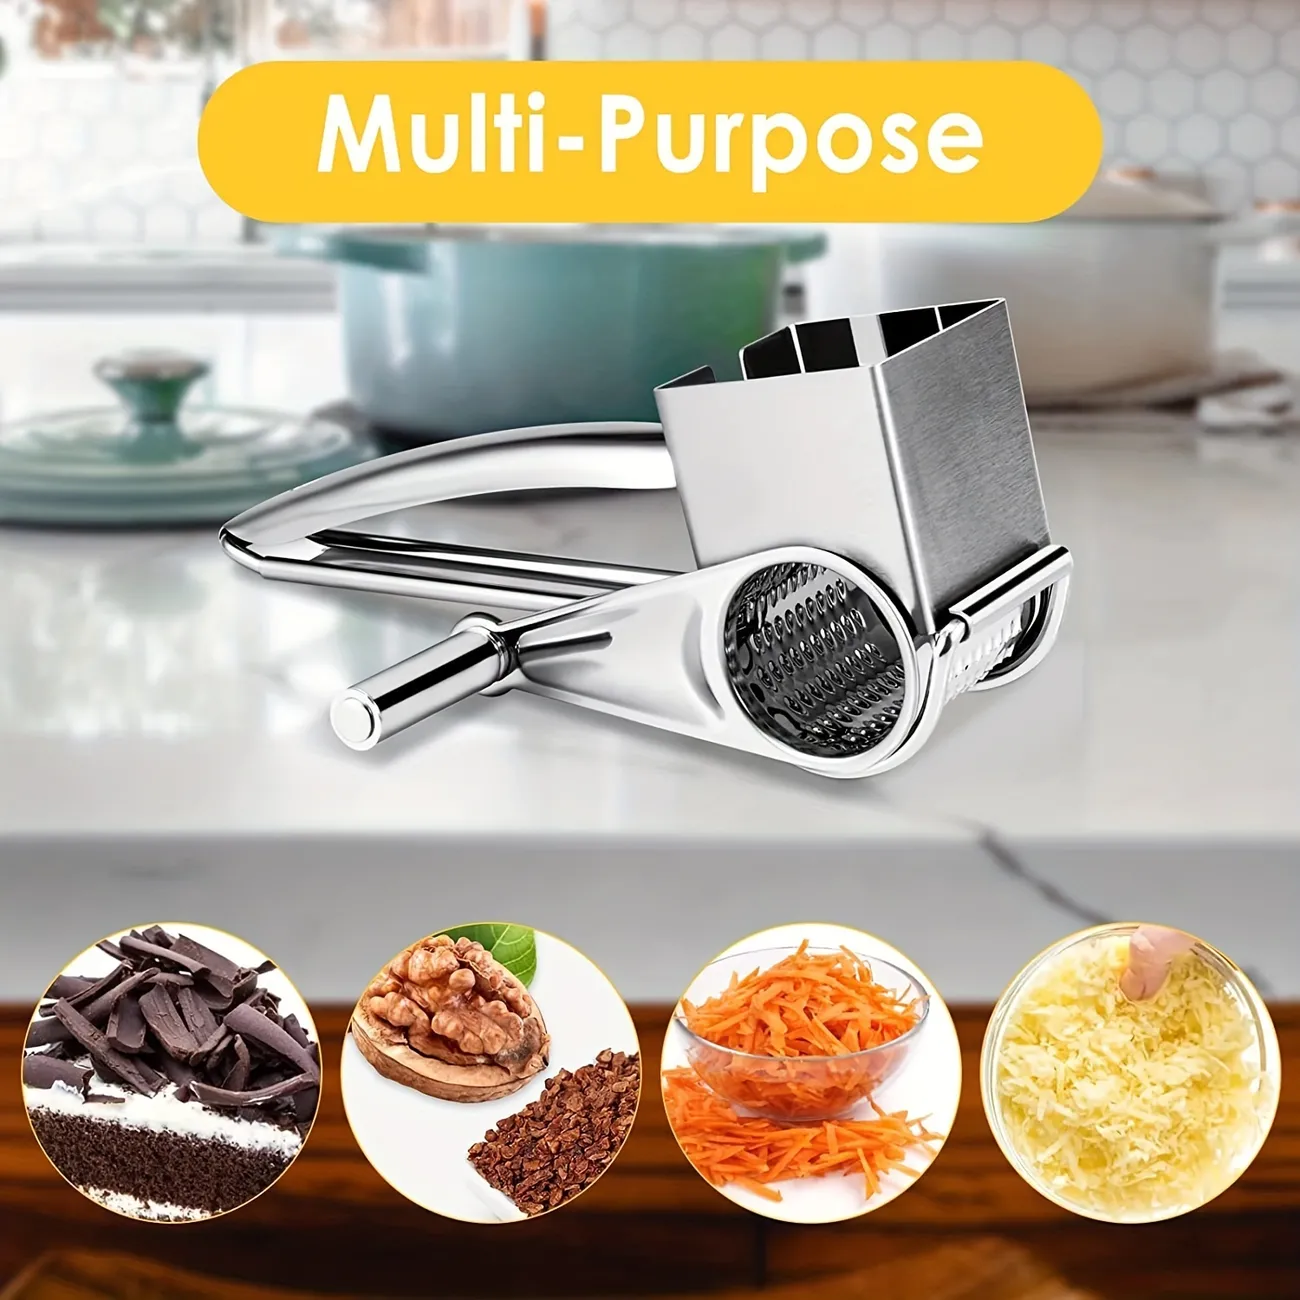 Manual Rotary Cheese Grater With Handle With 4 Interchangeable Sharp Drum  Blades Stainless Steel Handheld Cheese Shredder Easy To Clean And Use For  Cheese Vegetable Chocolate Walnut Nuts Kitchen Tool Kitchen Supplies 